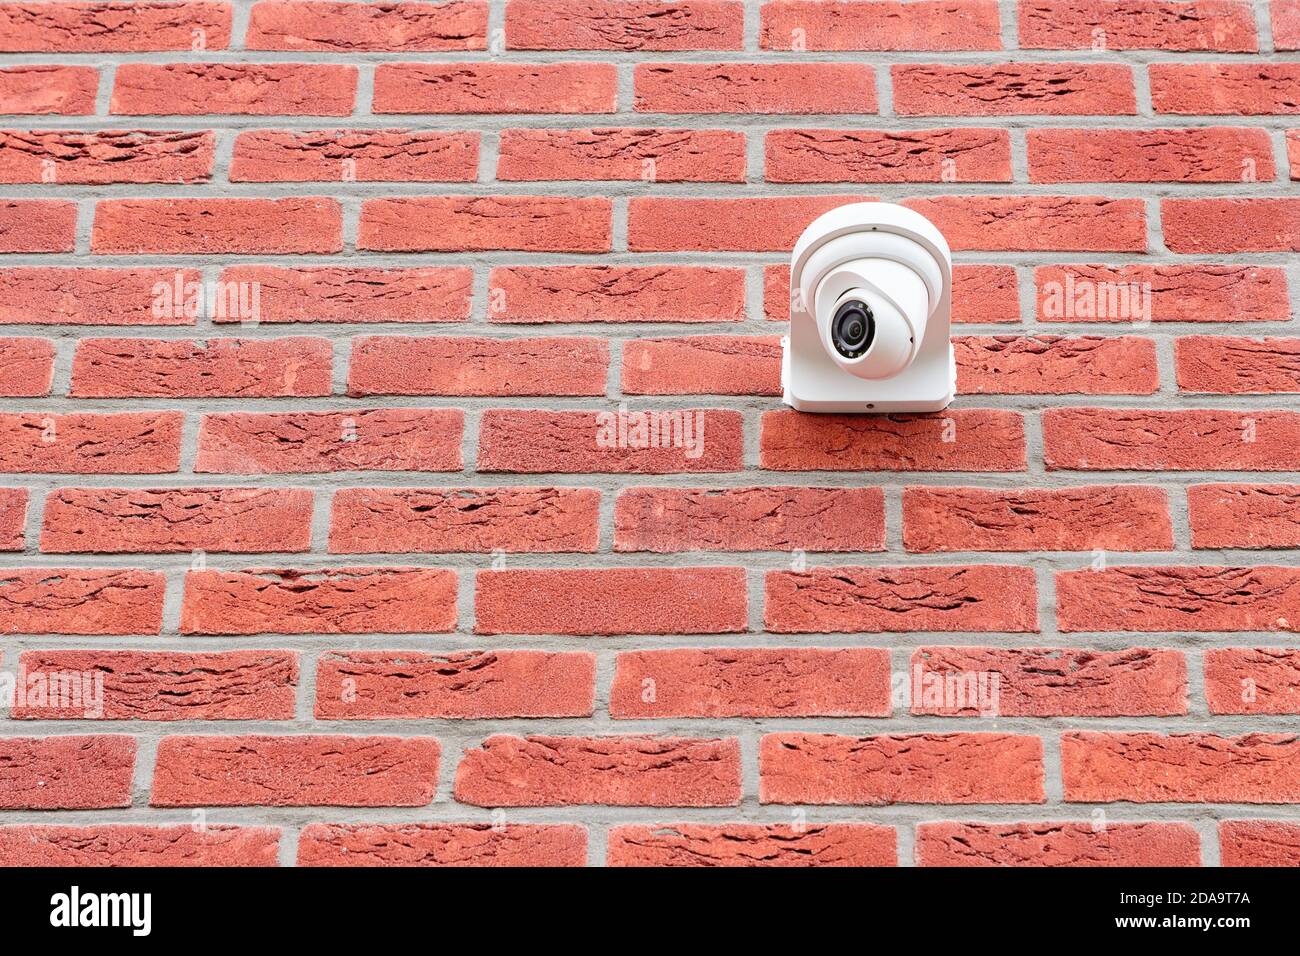 Low angle view on white cctv security camera mounted on a red brick wall. Security concept, big brother is watching Stock Photo